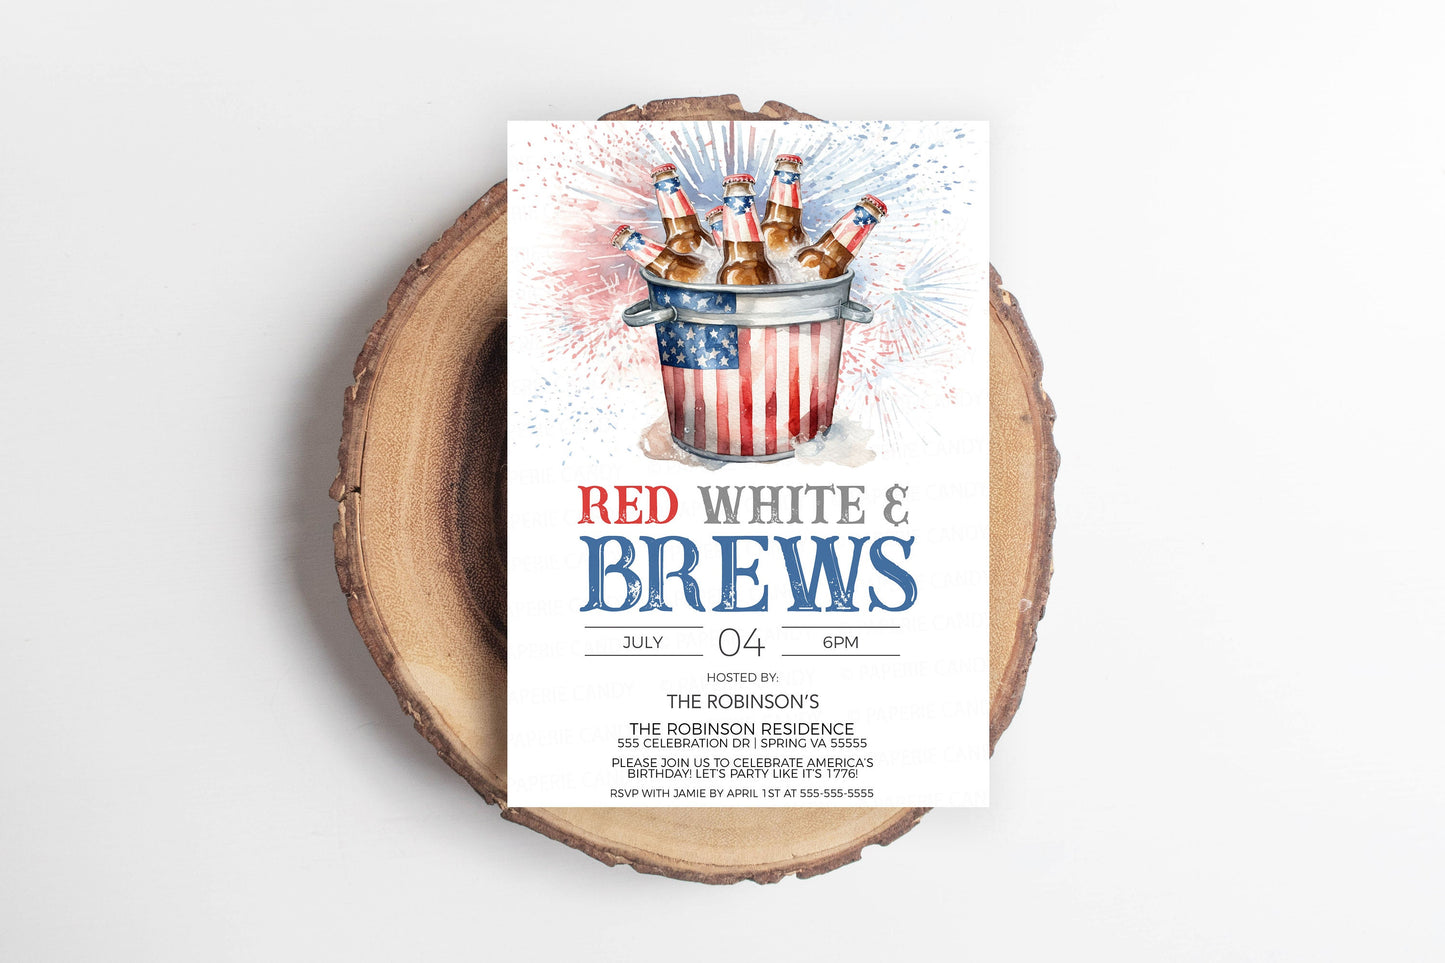 4th Of July Invitation, Red White & Brews Invite, Independence Day Party Invite, July 4th BBQ Beer Party, Editable Printable Template